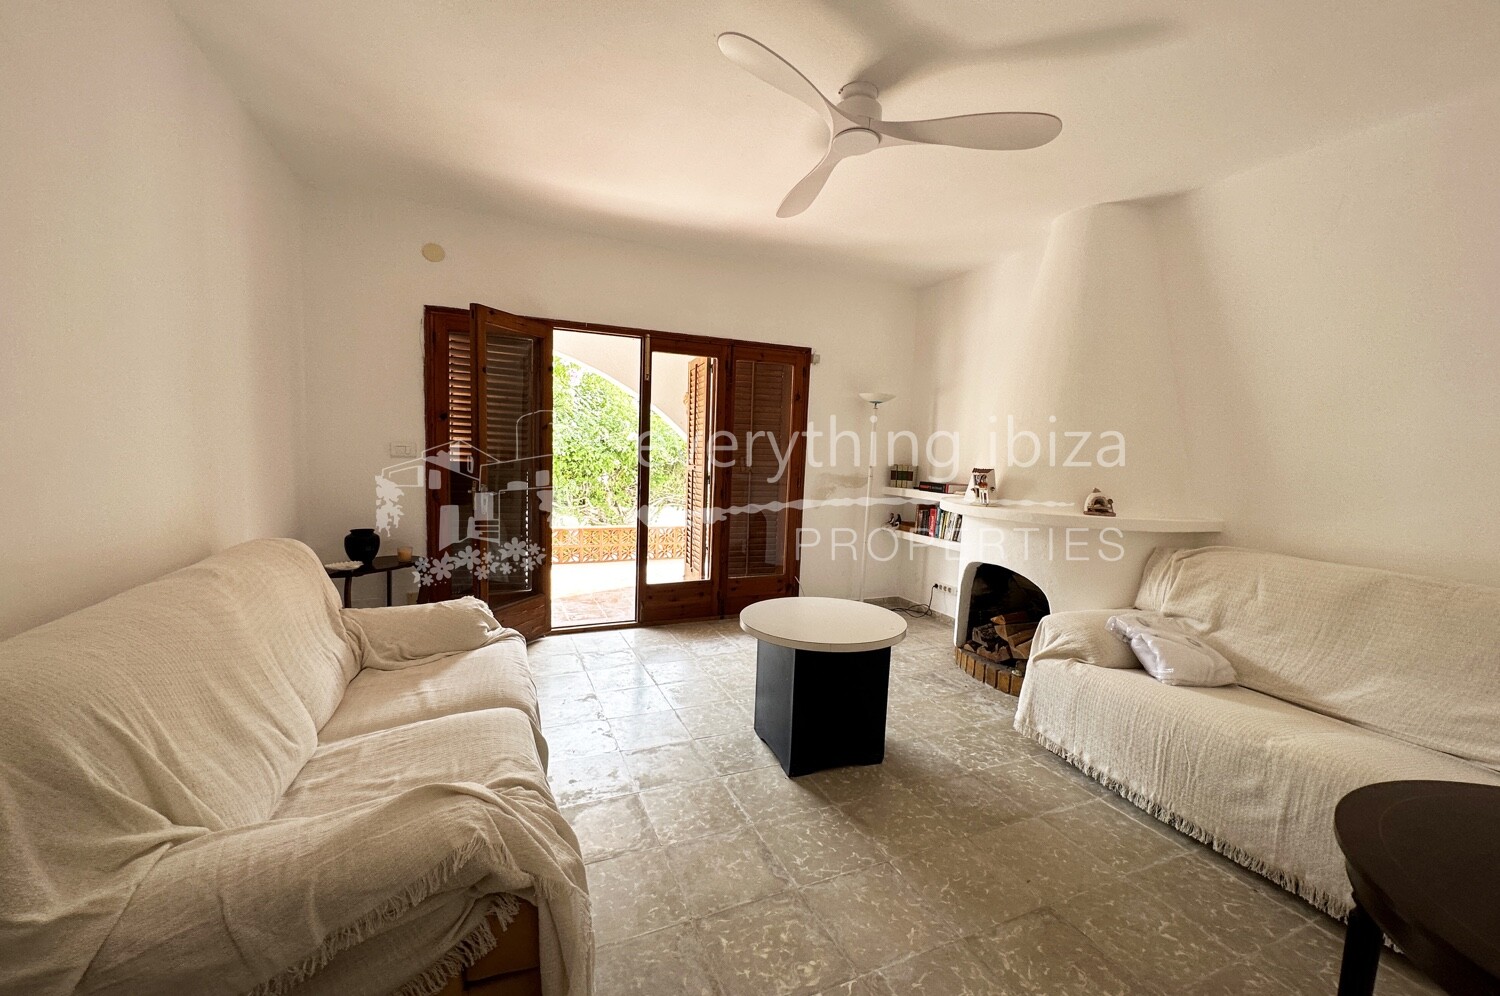 Charming Cosy Apartment Situated in Popular San Agustin, ref. 1626, for sale in Ibiza by everything ibiza Properties